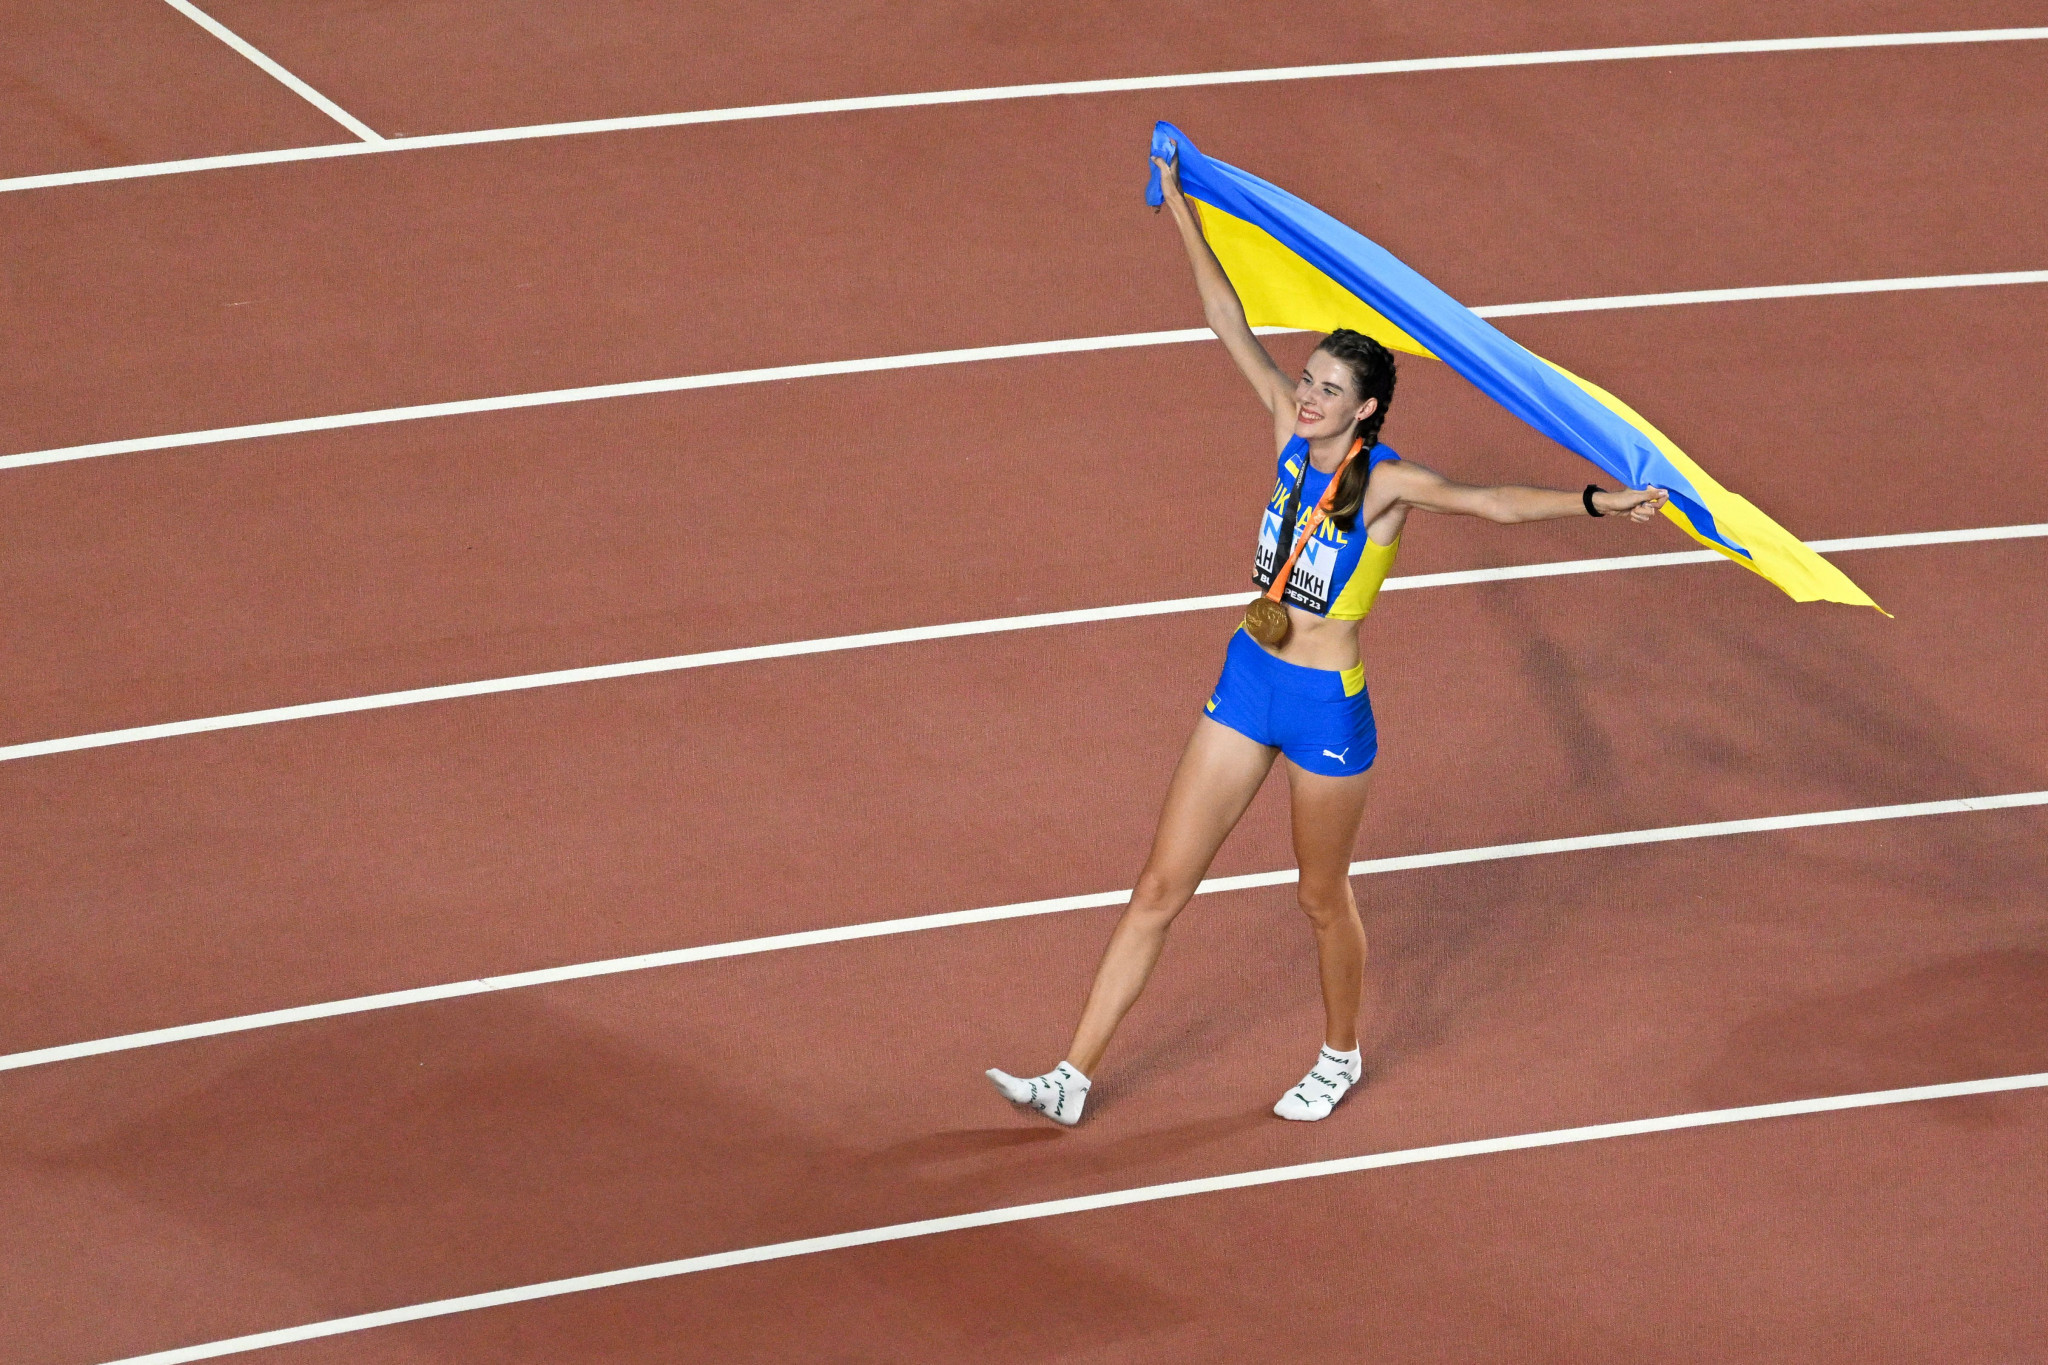 Yaroslava Mahuchikh won Ukraine's first gold medal of the World Athletics Championships with victory in the women's high jump ©Getty Images